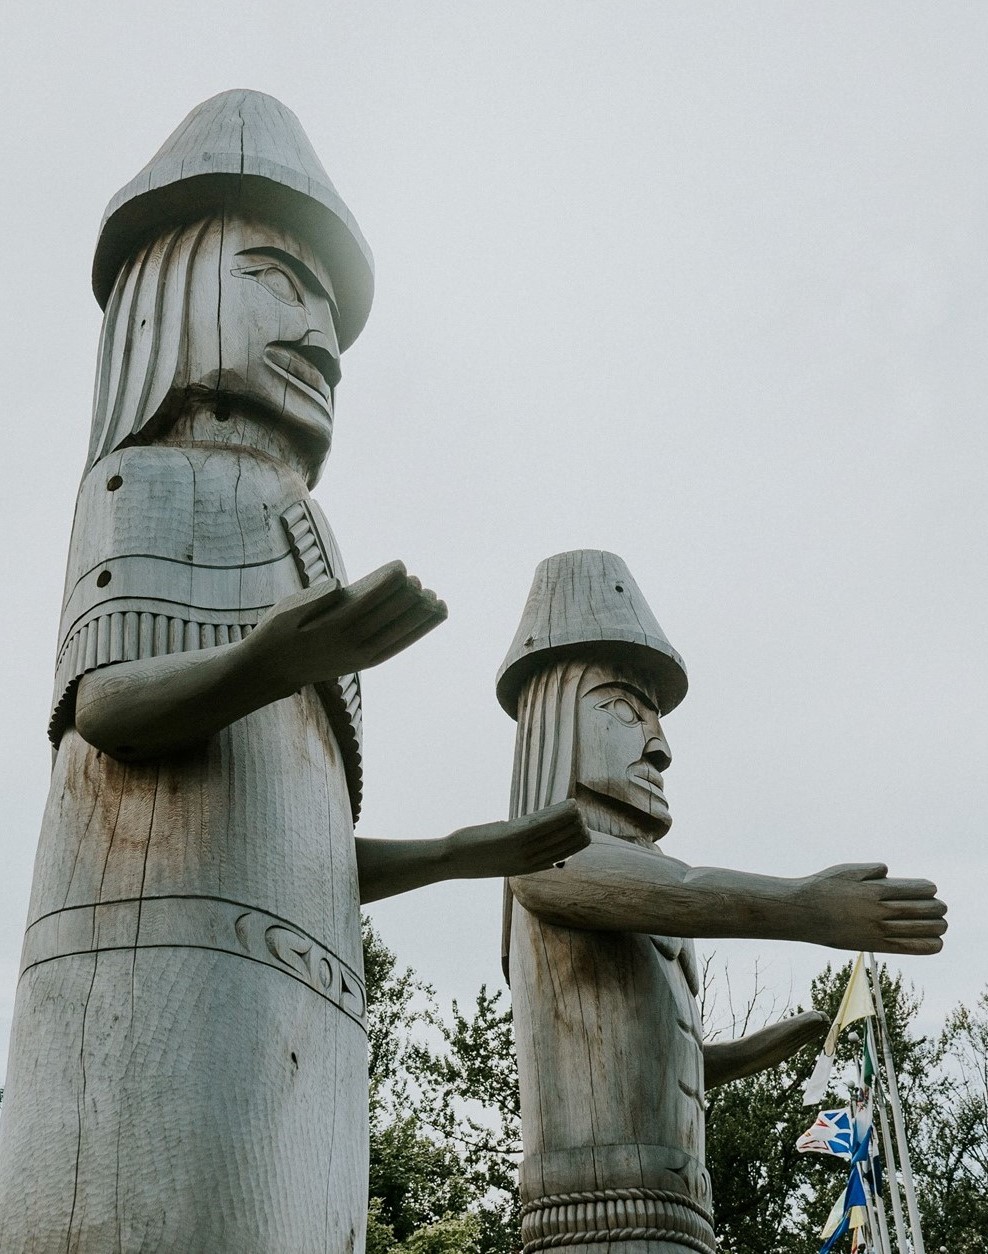 Artist Terry Horne's Stó:lō Welcome Figures that stand outside the Chilliwack Visitor Centre.